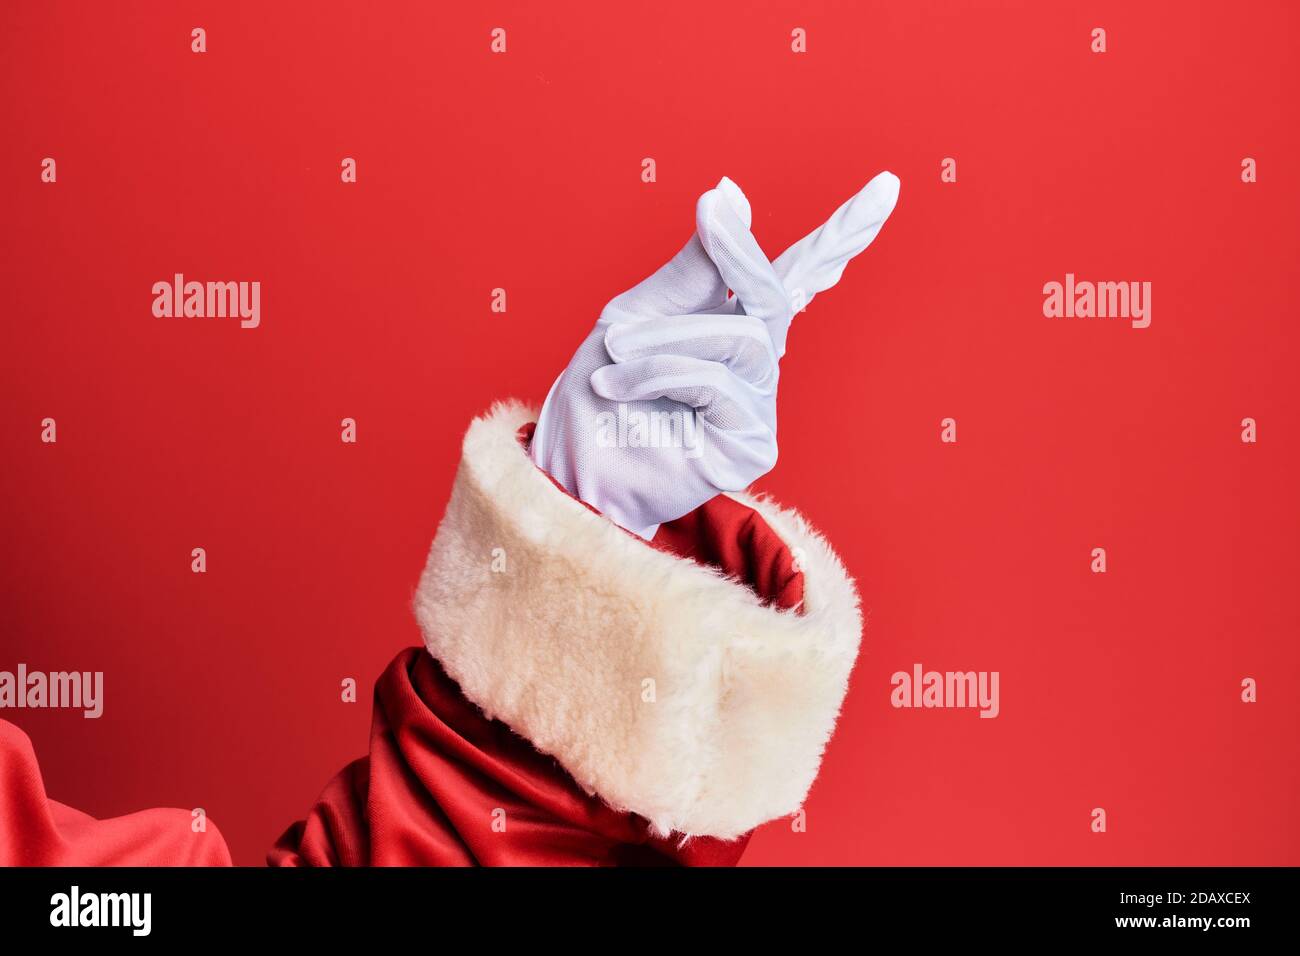 Hand of a man wearing santa claus costume and gloves over red background snapping fingers for success, easy and click symbol gesture with hand Stock Photo